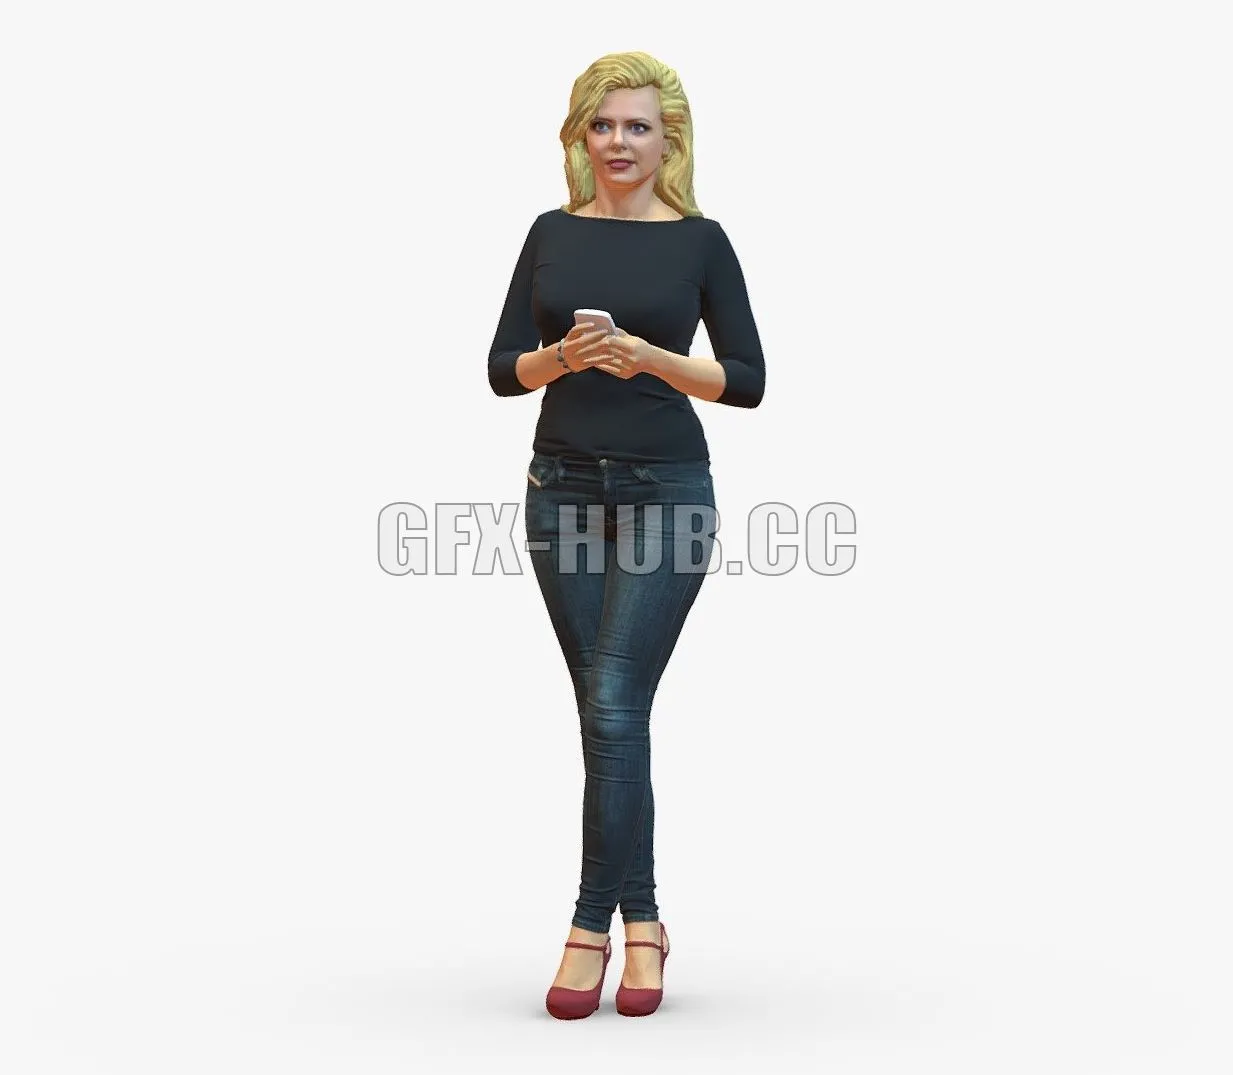 PBR Game 3D Model – Blond woman with phone 0785